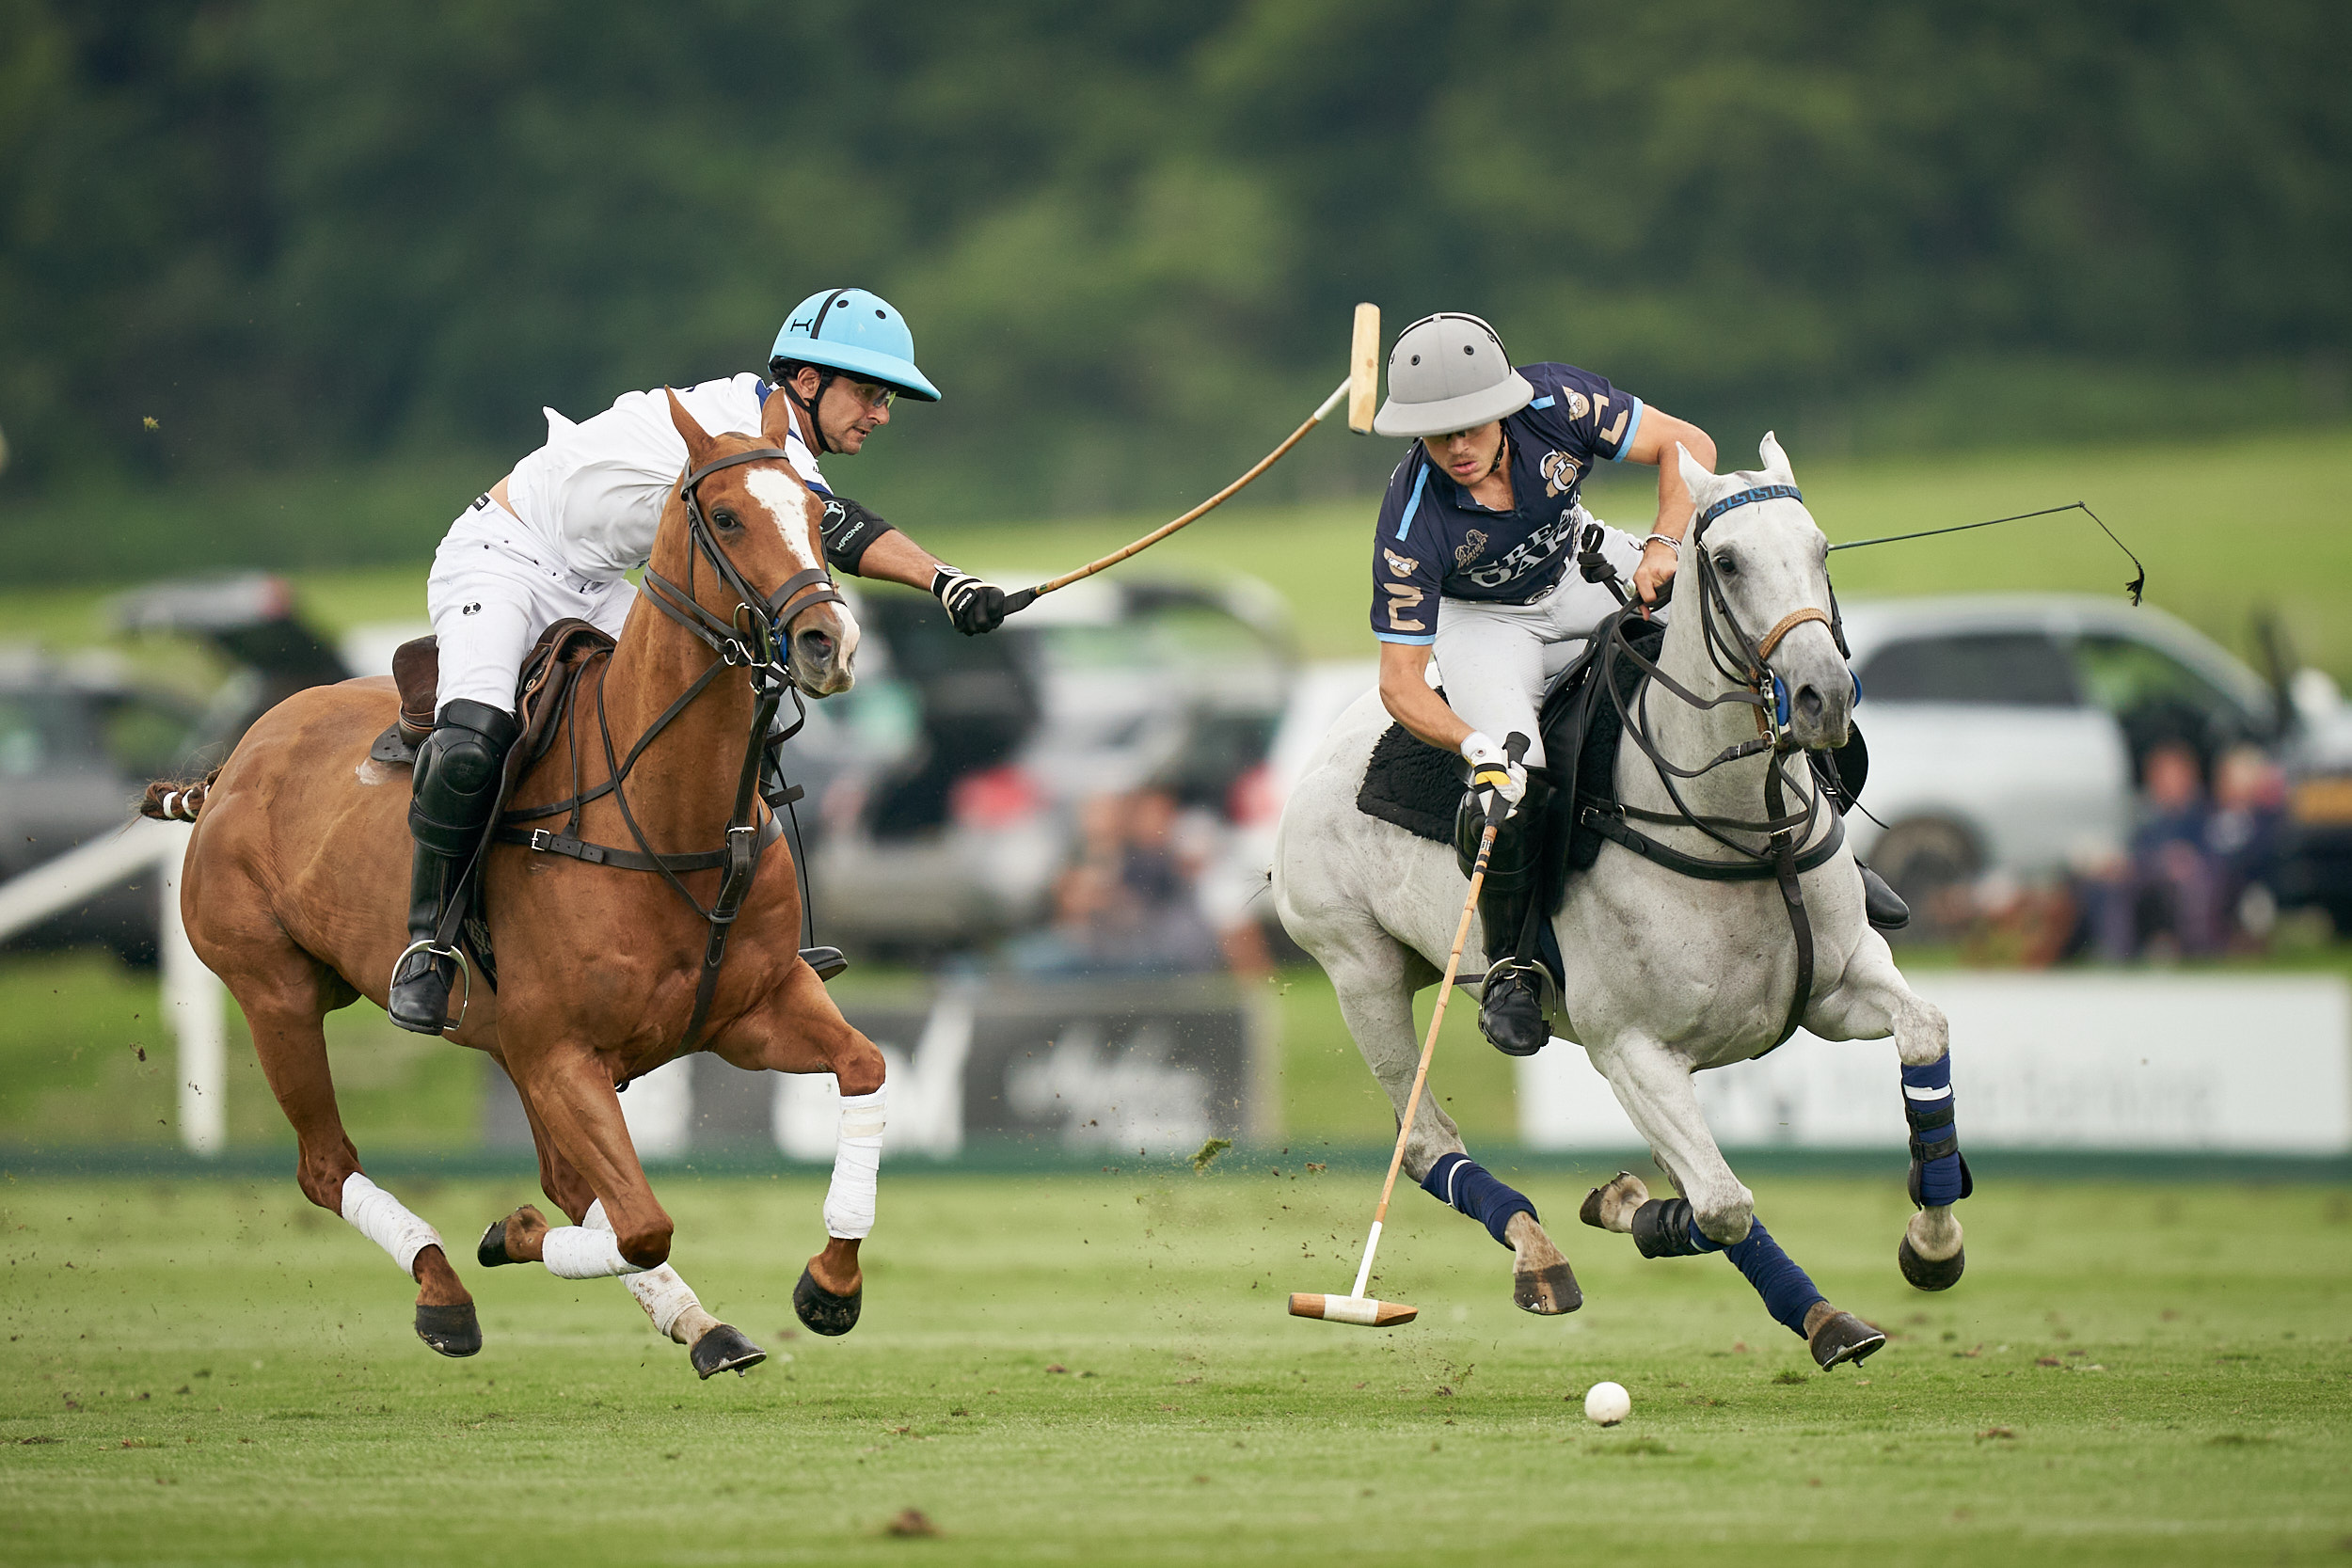 Polo Gold Cup